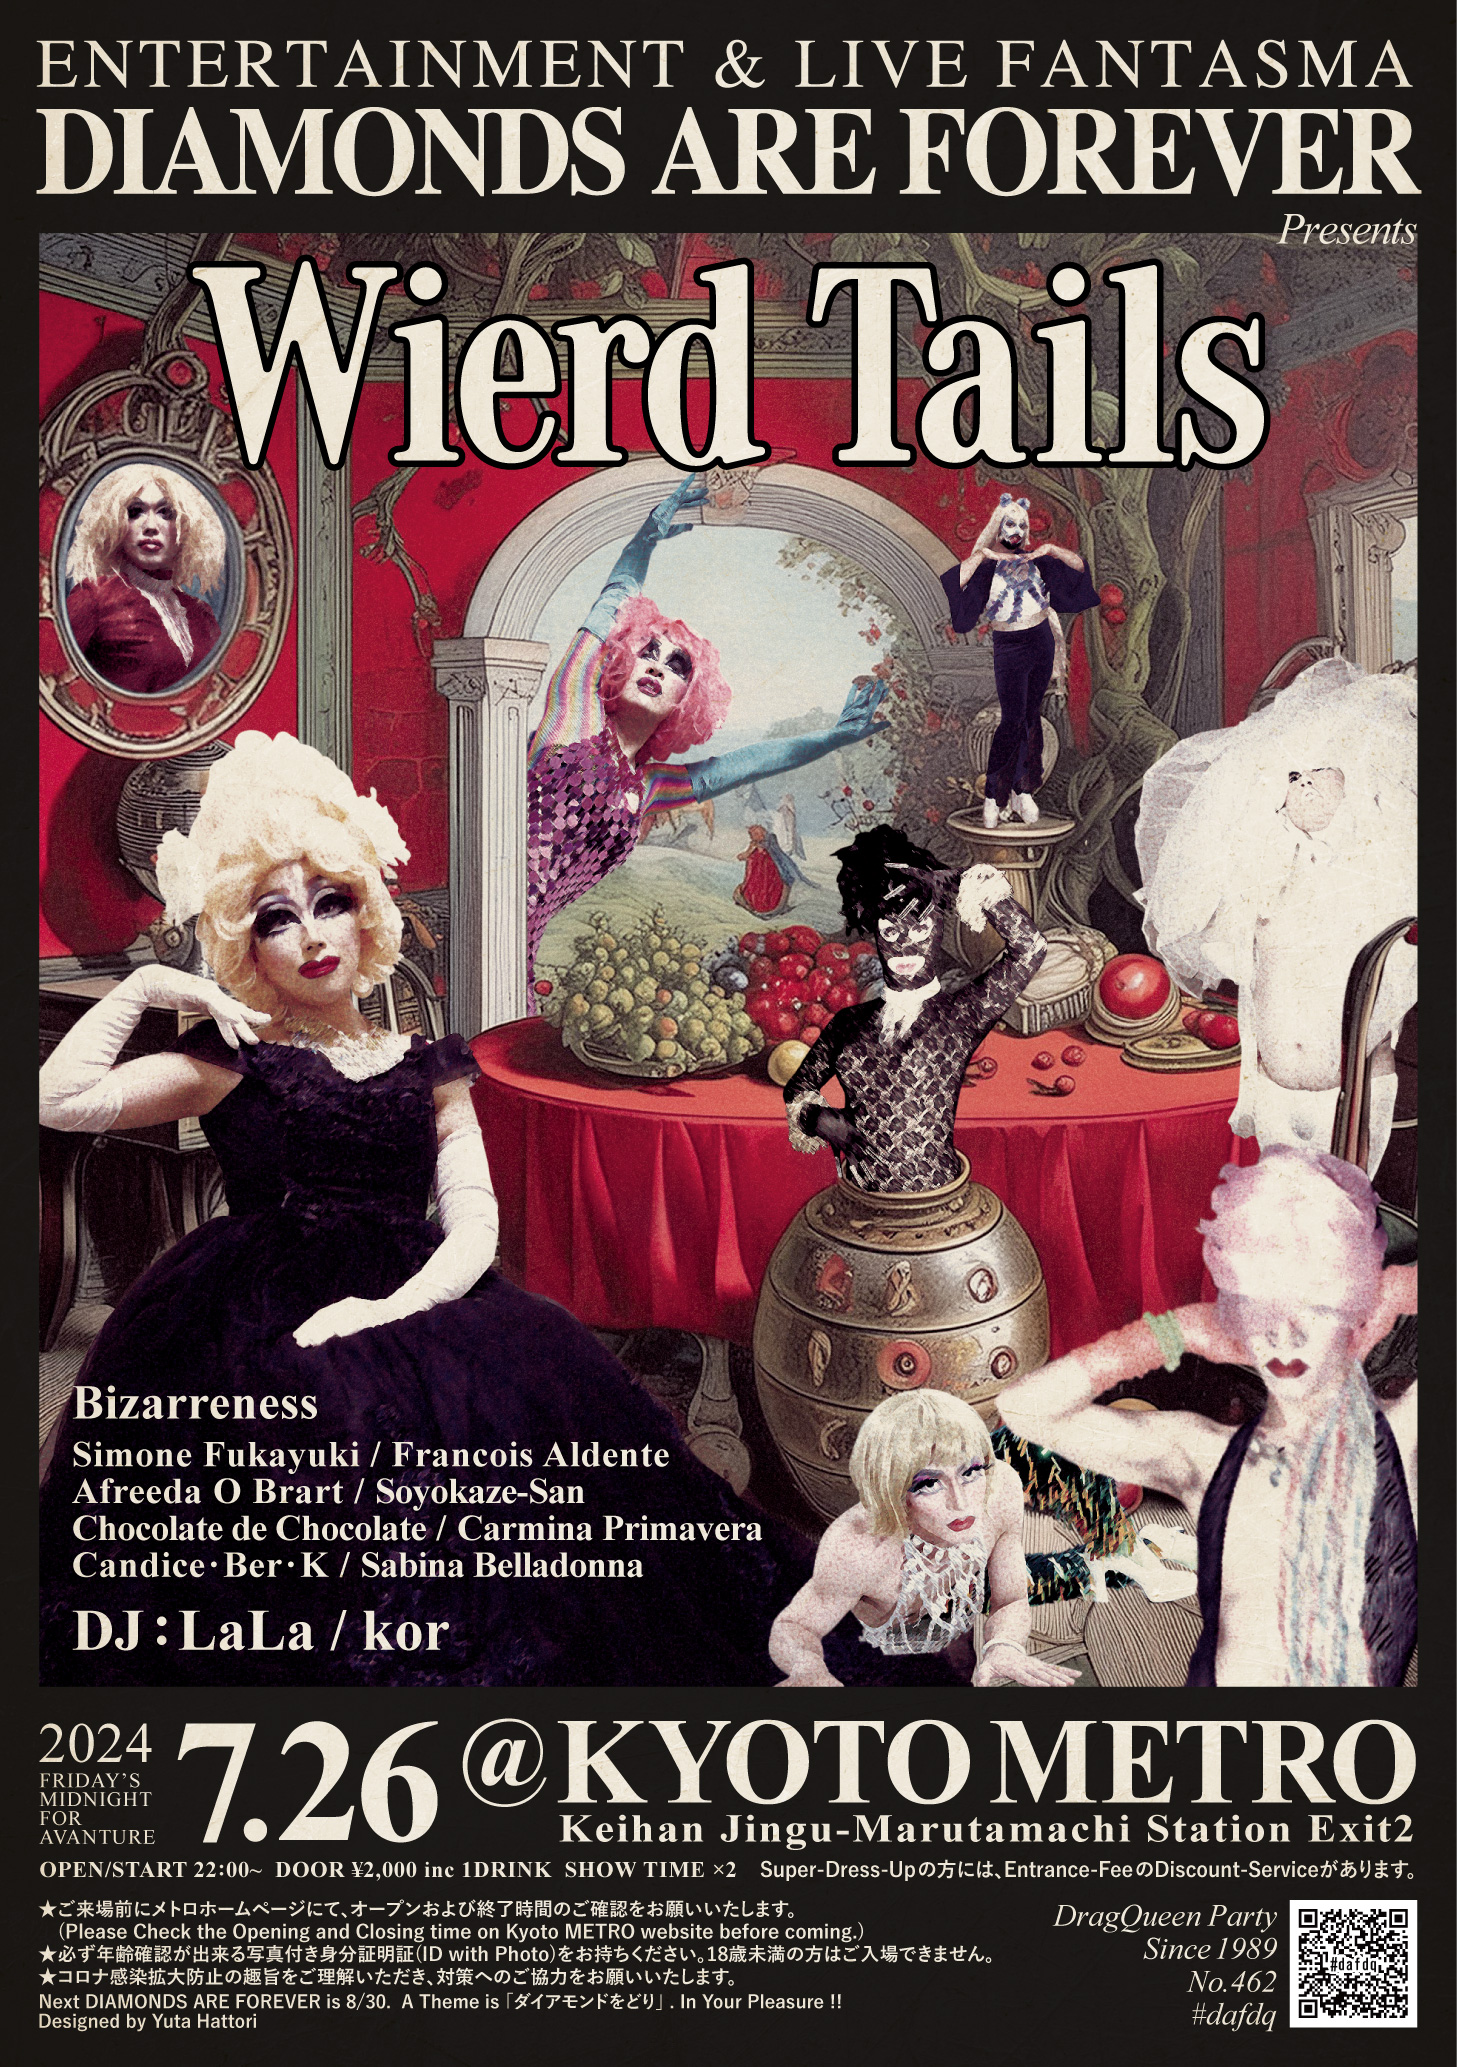 DIAMONDS ARE FOREVER presents “Wierd Tales” | CLUB METRO | 京都メトロ